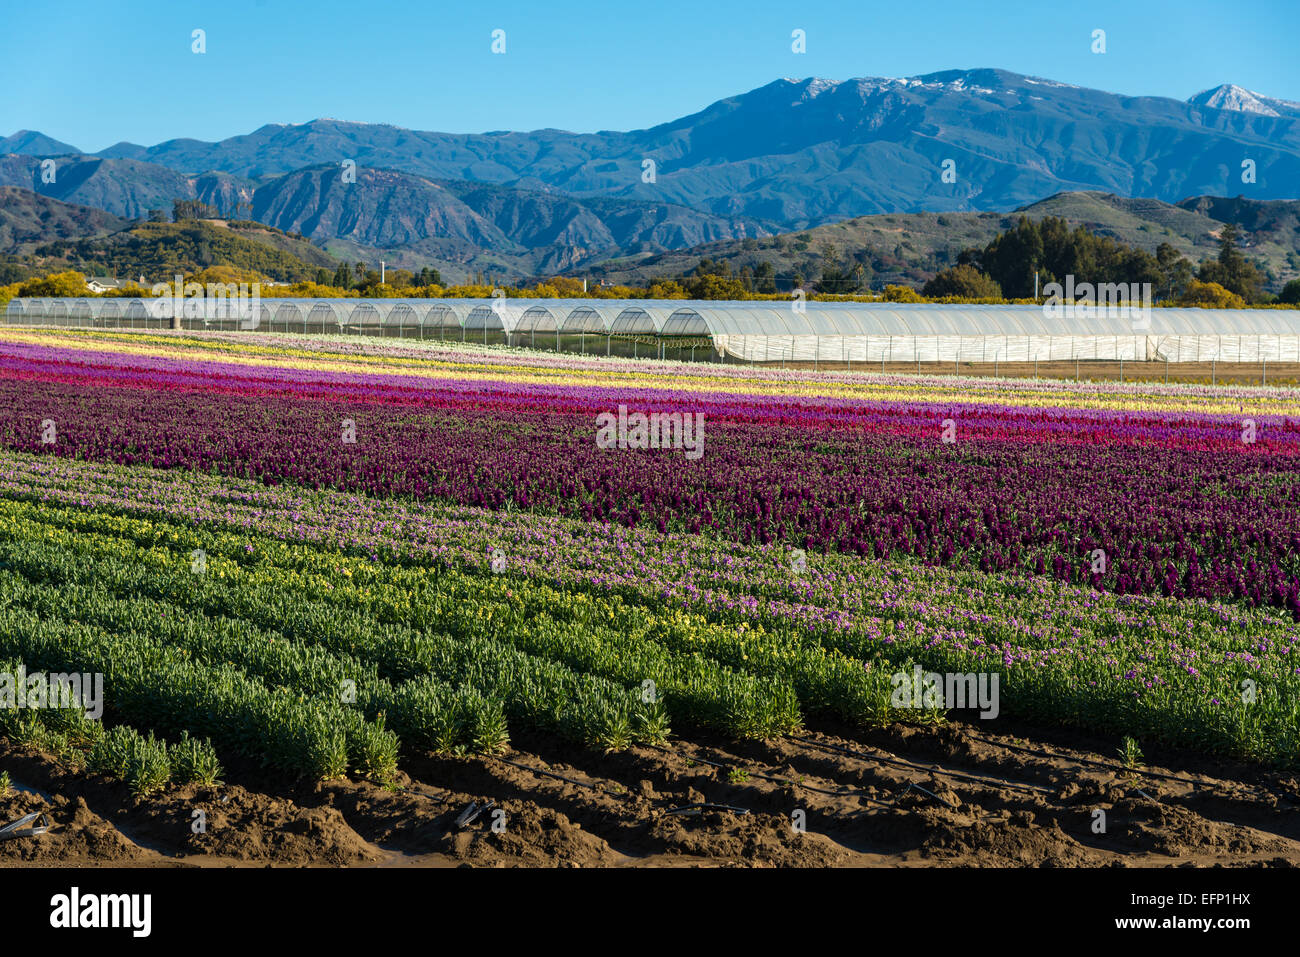 Rows of purple; red; pink and yellow snap dragons blooming in a field Stock Photo